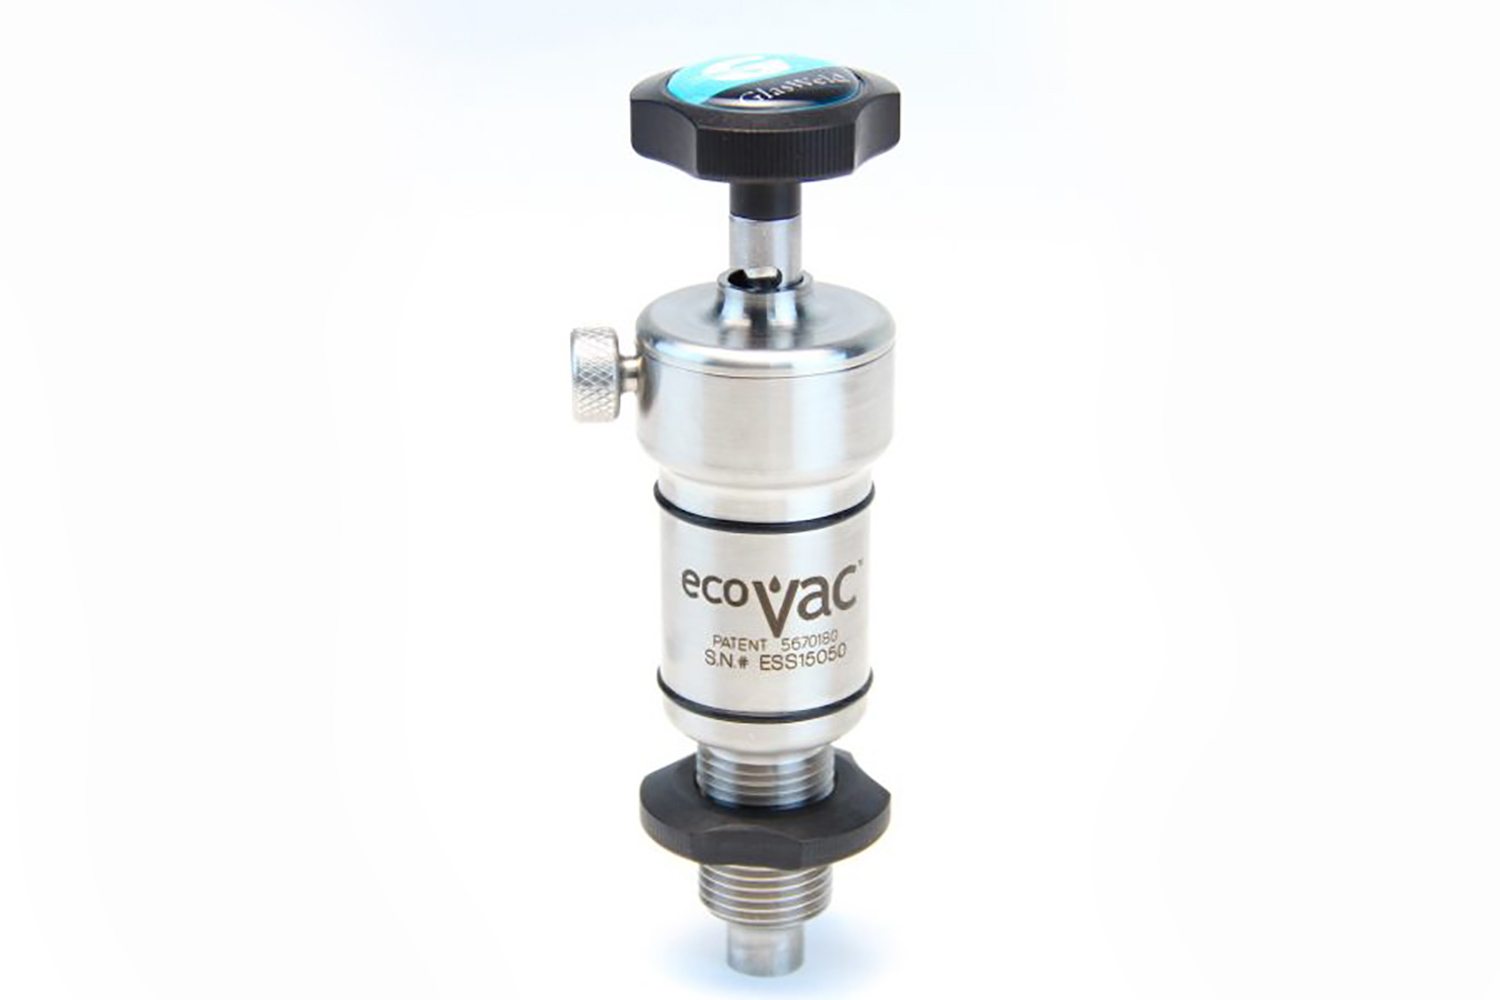 GlasWeld Injector Assembly ProVac Zoom™ Injector Assembly and ecoVac Injector Assembly in stainless steel windshield repair tool - JAAGS